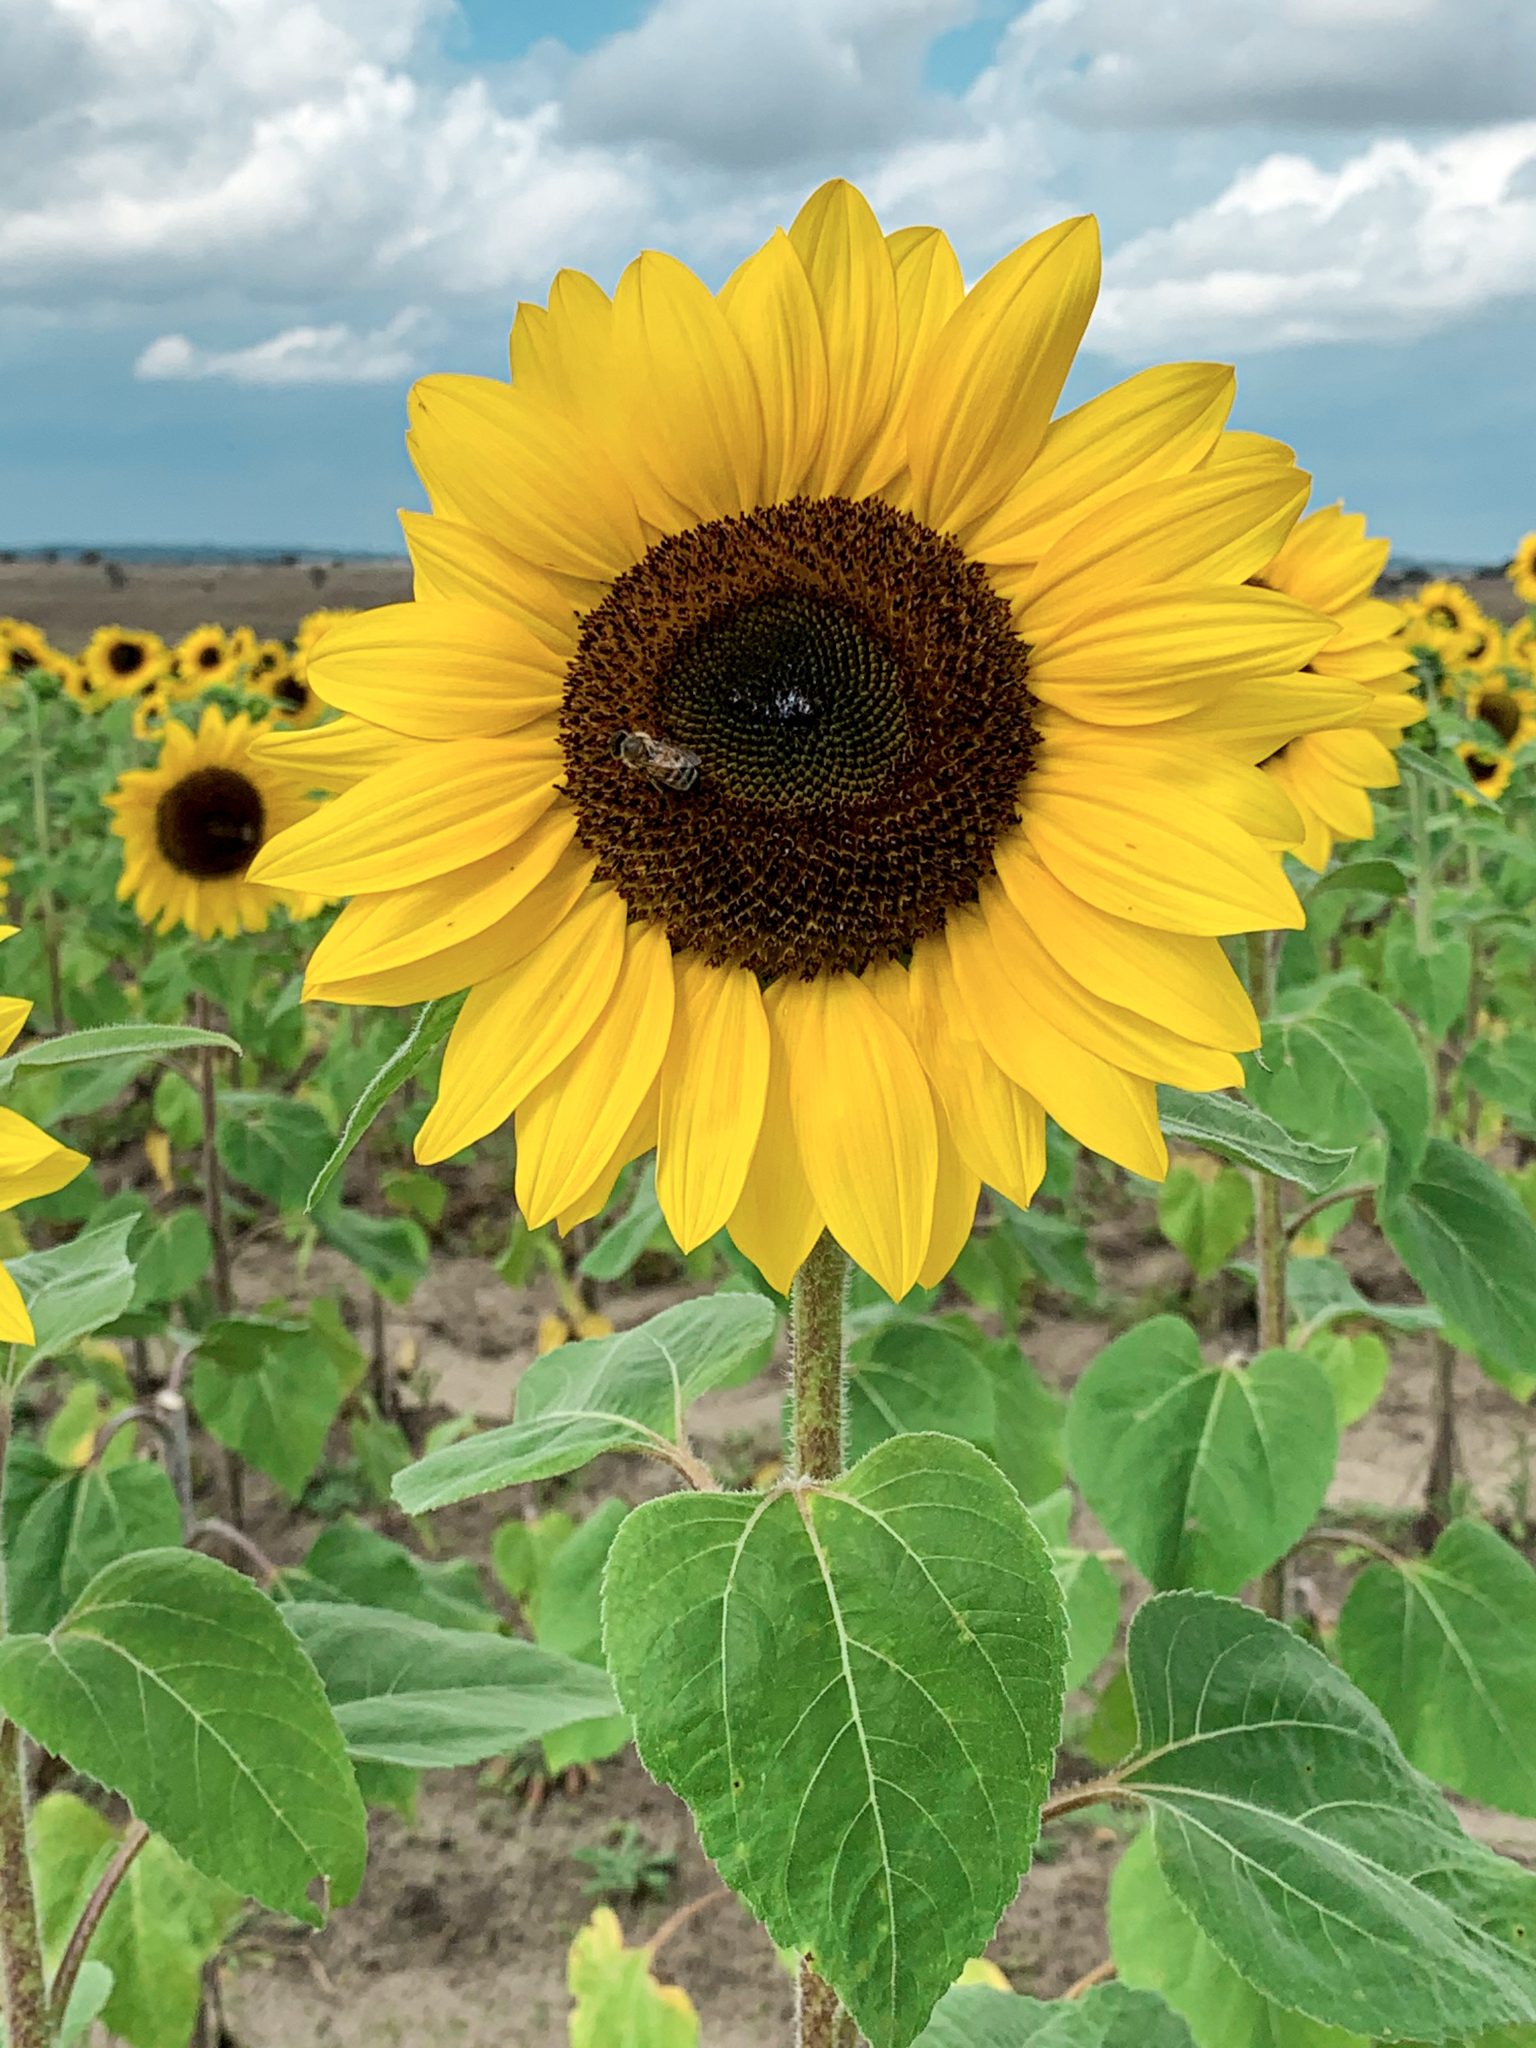 Sunflower with a bee on it standing tall in a field